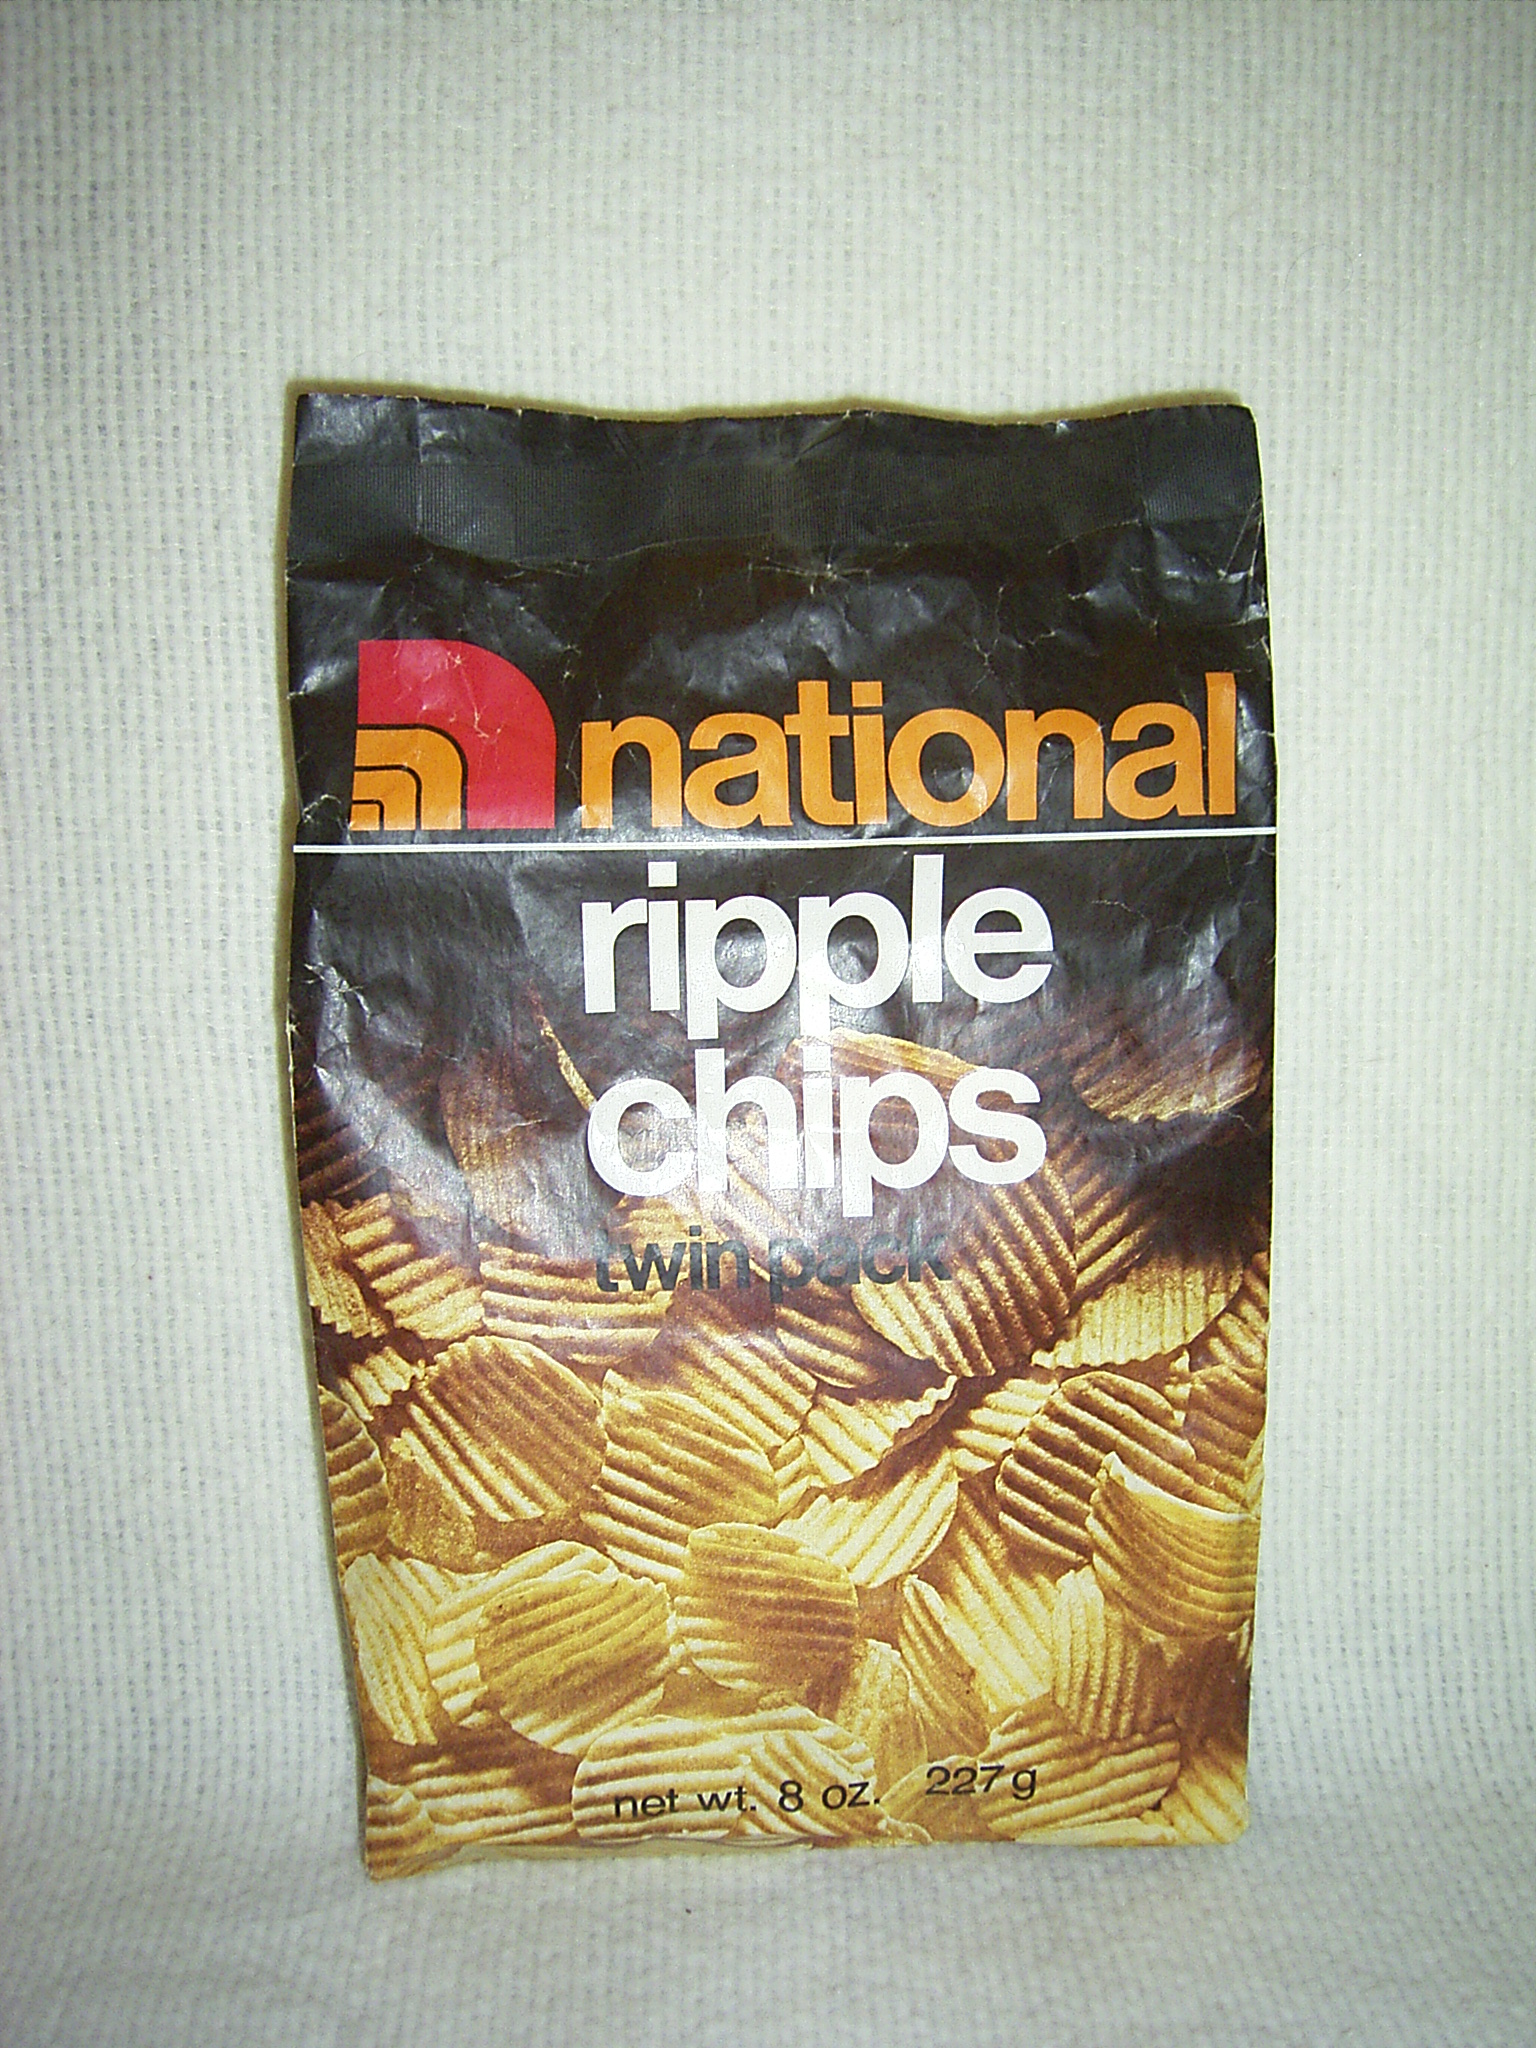 a bag of potato chips is shown here